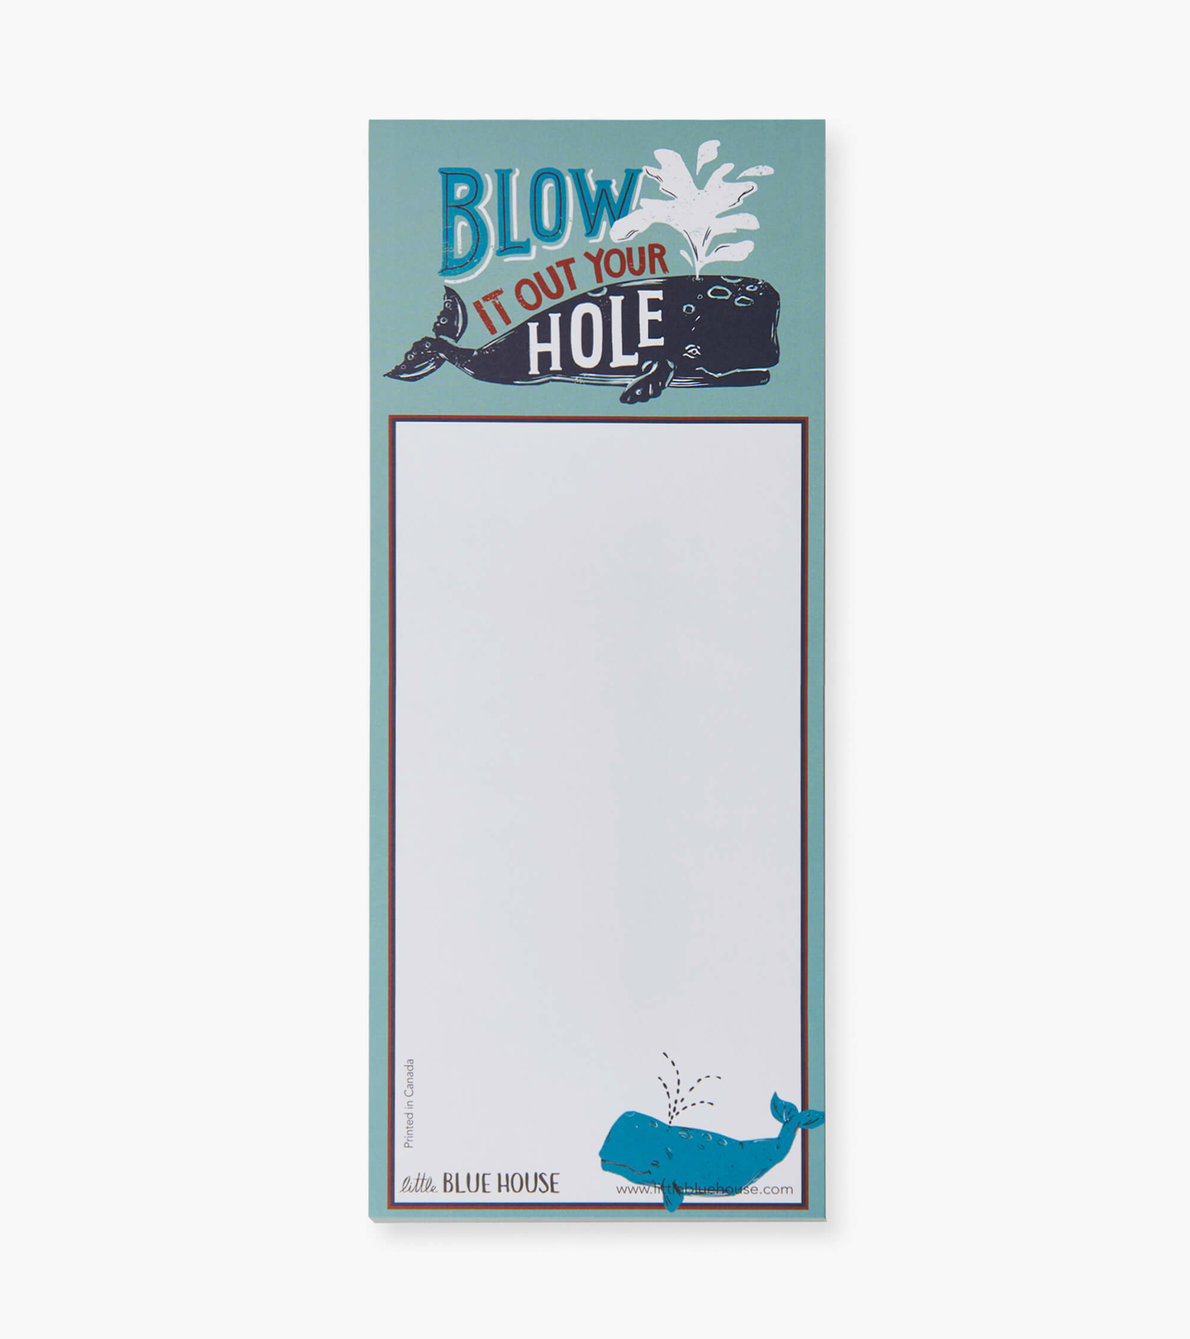 View larger image of Blow it Out Your Hole Magnetic List